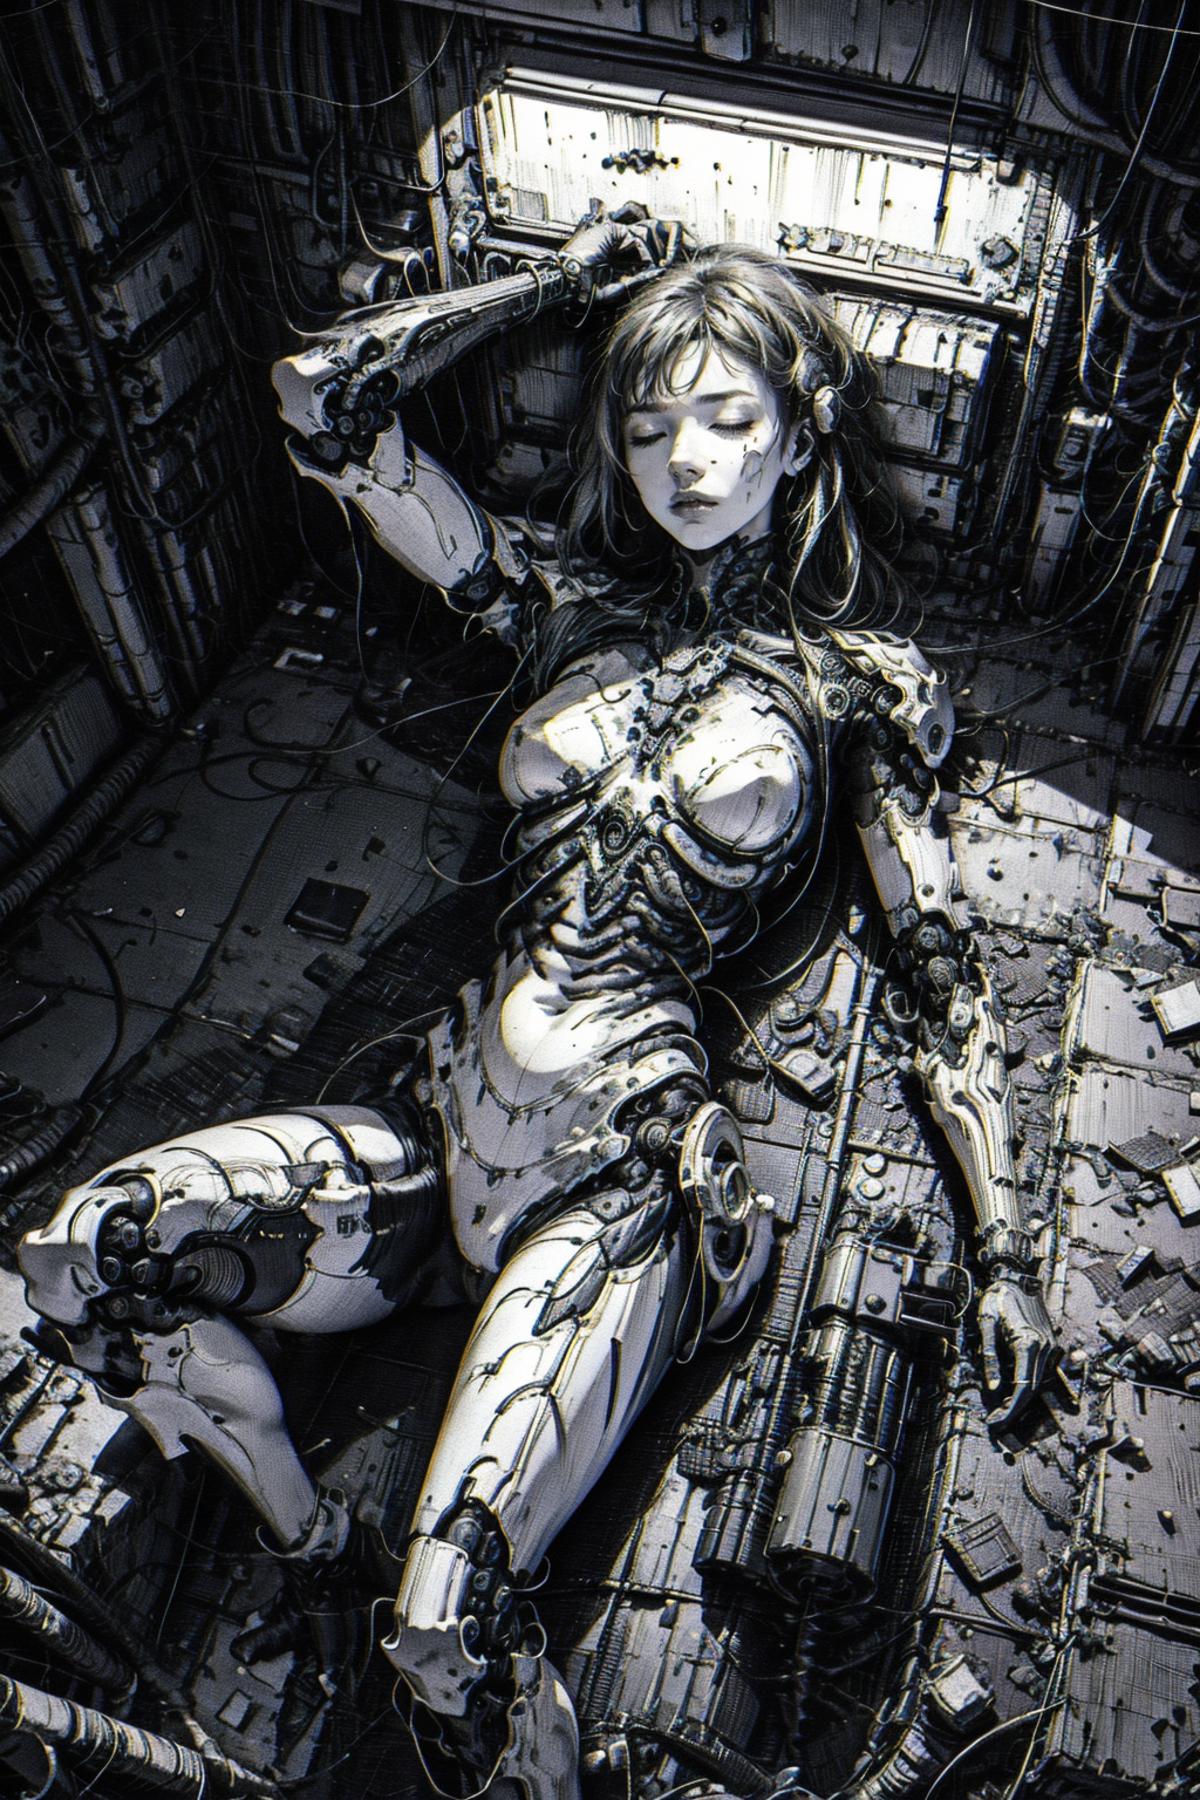 A woman in a futuristic image with a robotic arm and leg.